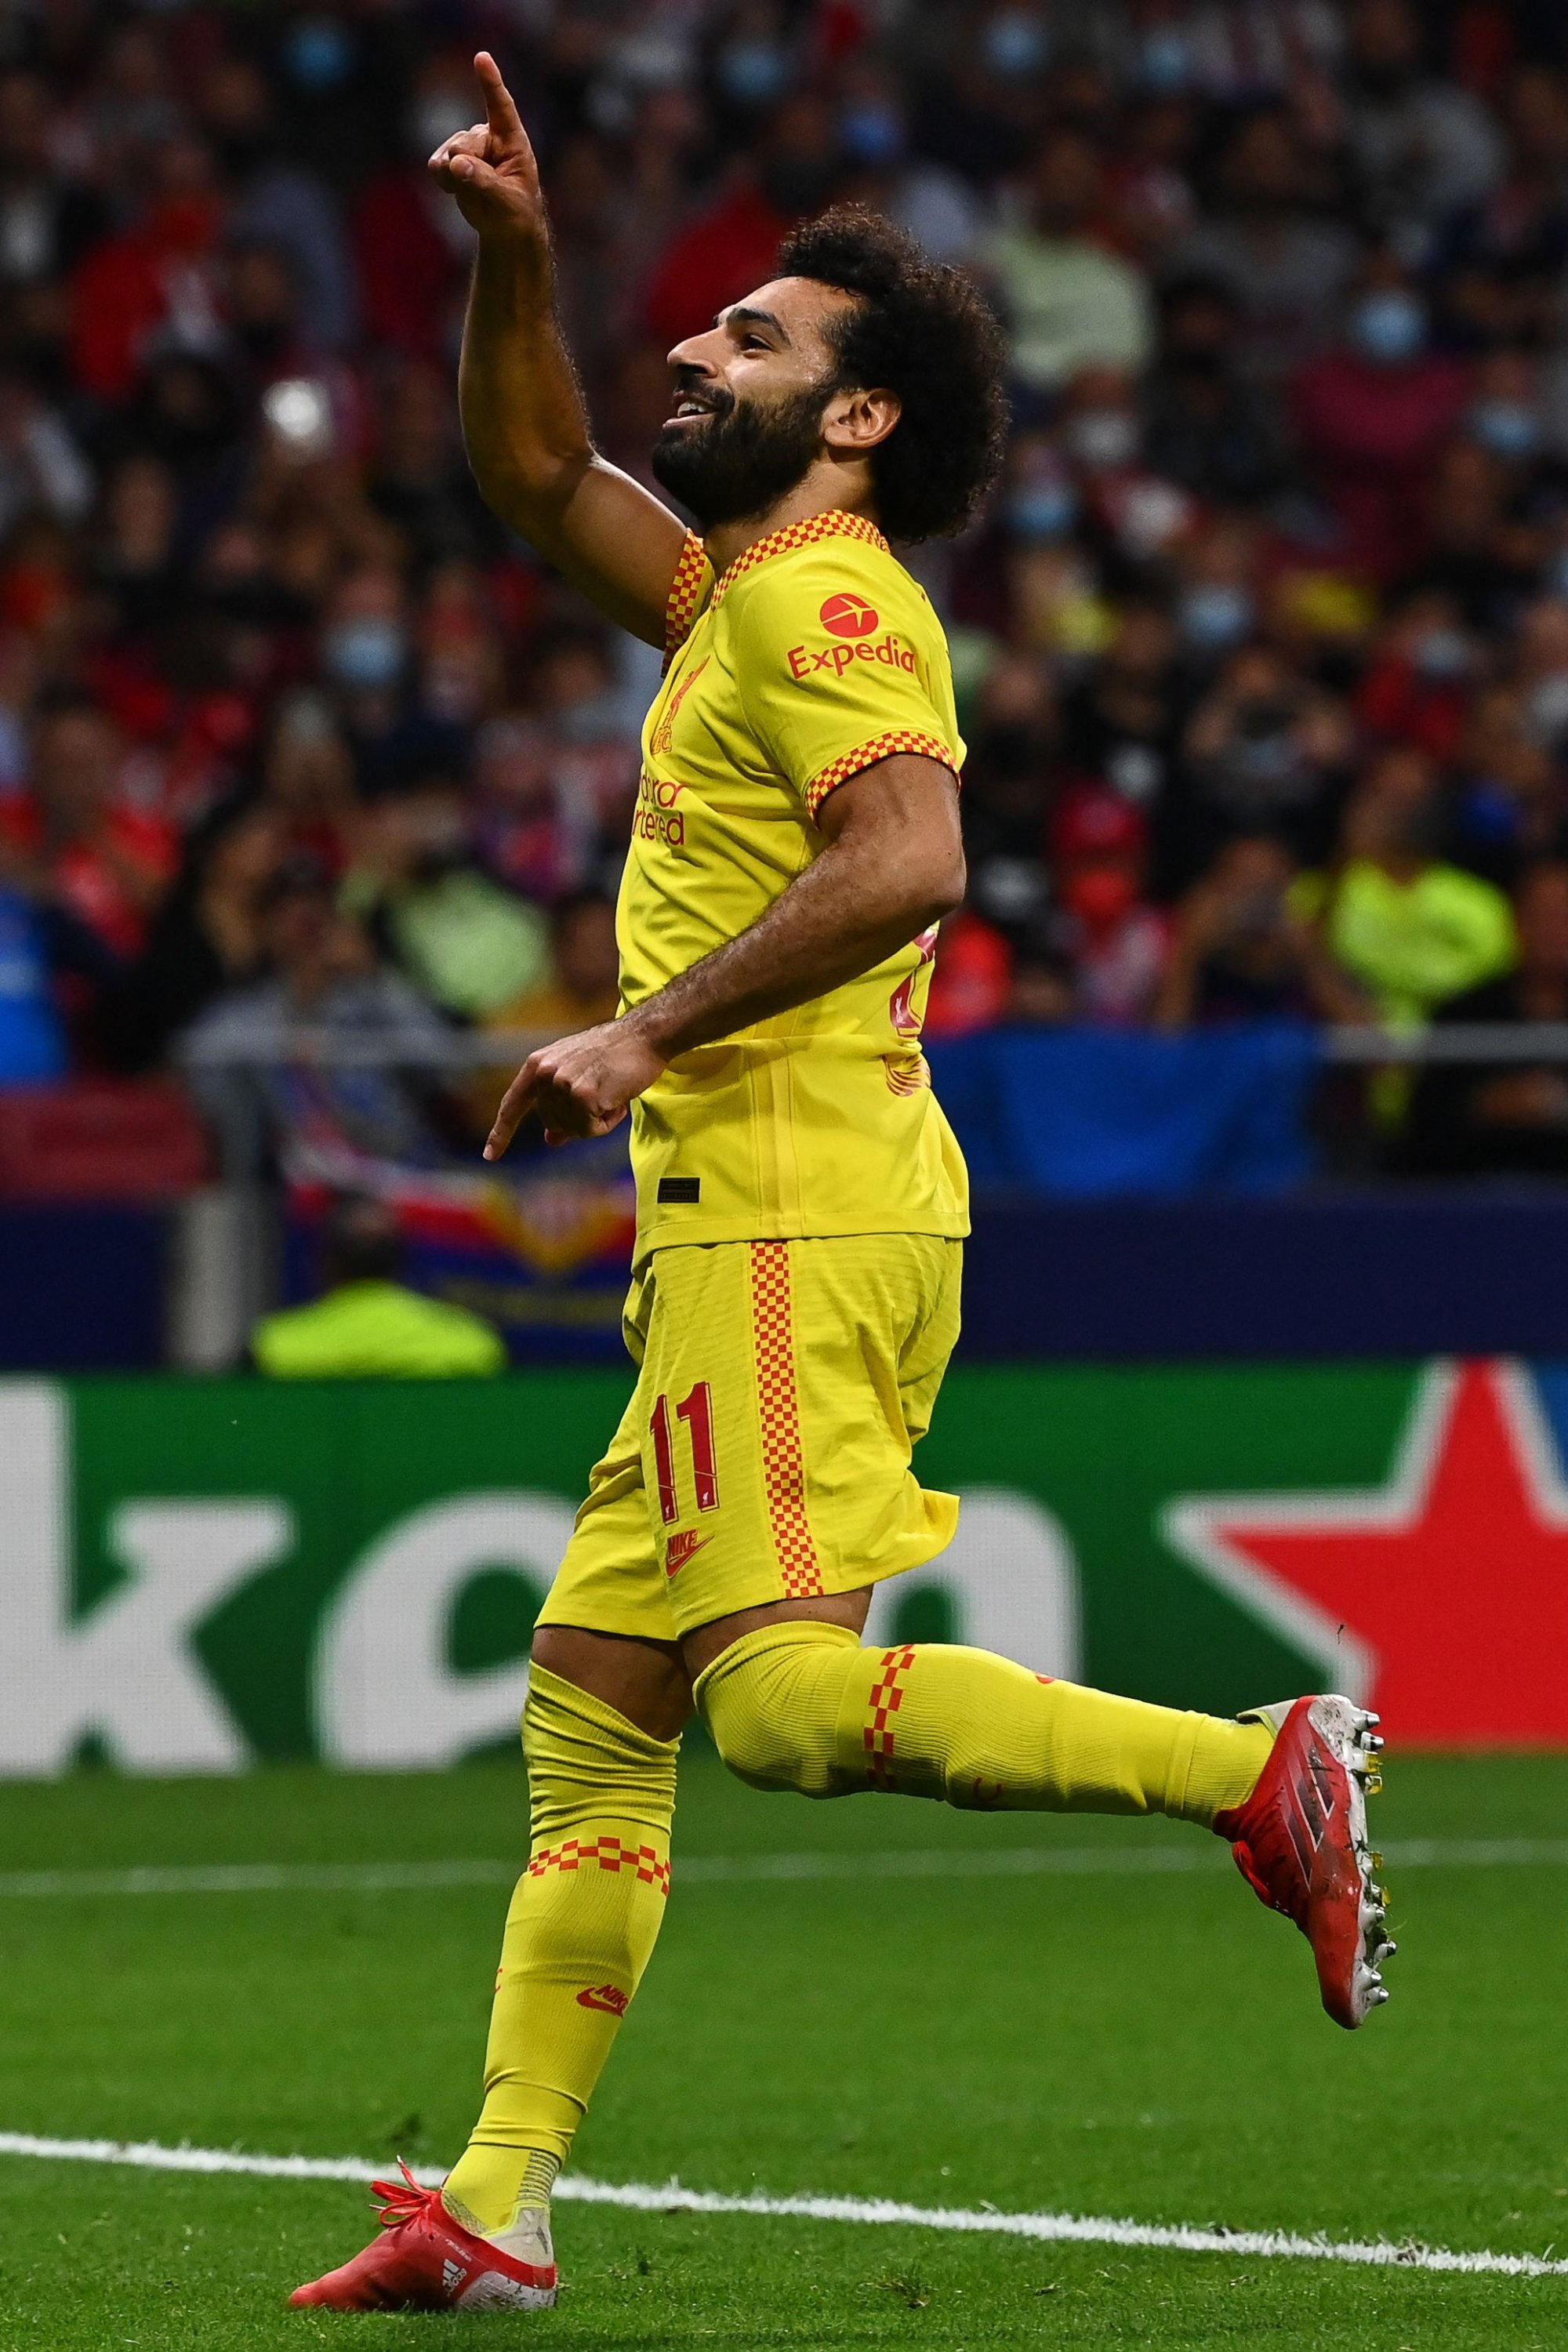 Liverpool's Mohamed Salah celebrates after scoring in the UEFA Champions League match against Atletico Madrid at the Wanda Metropolitano stadium, Madrid, Spain, Oct. 19, 2021. (AFP Photo)